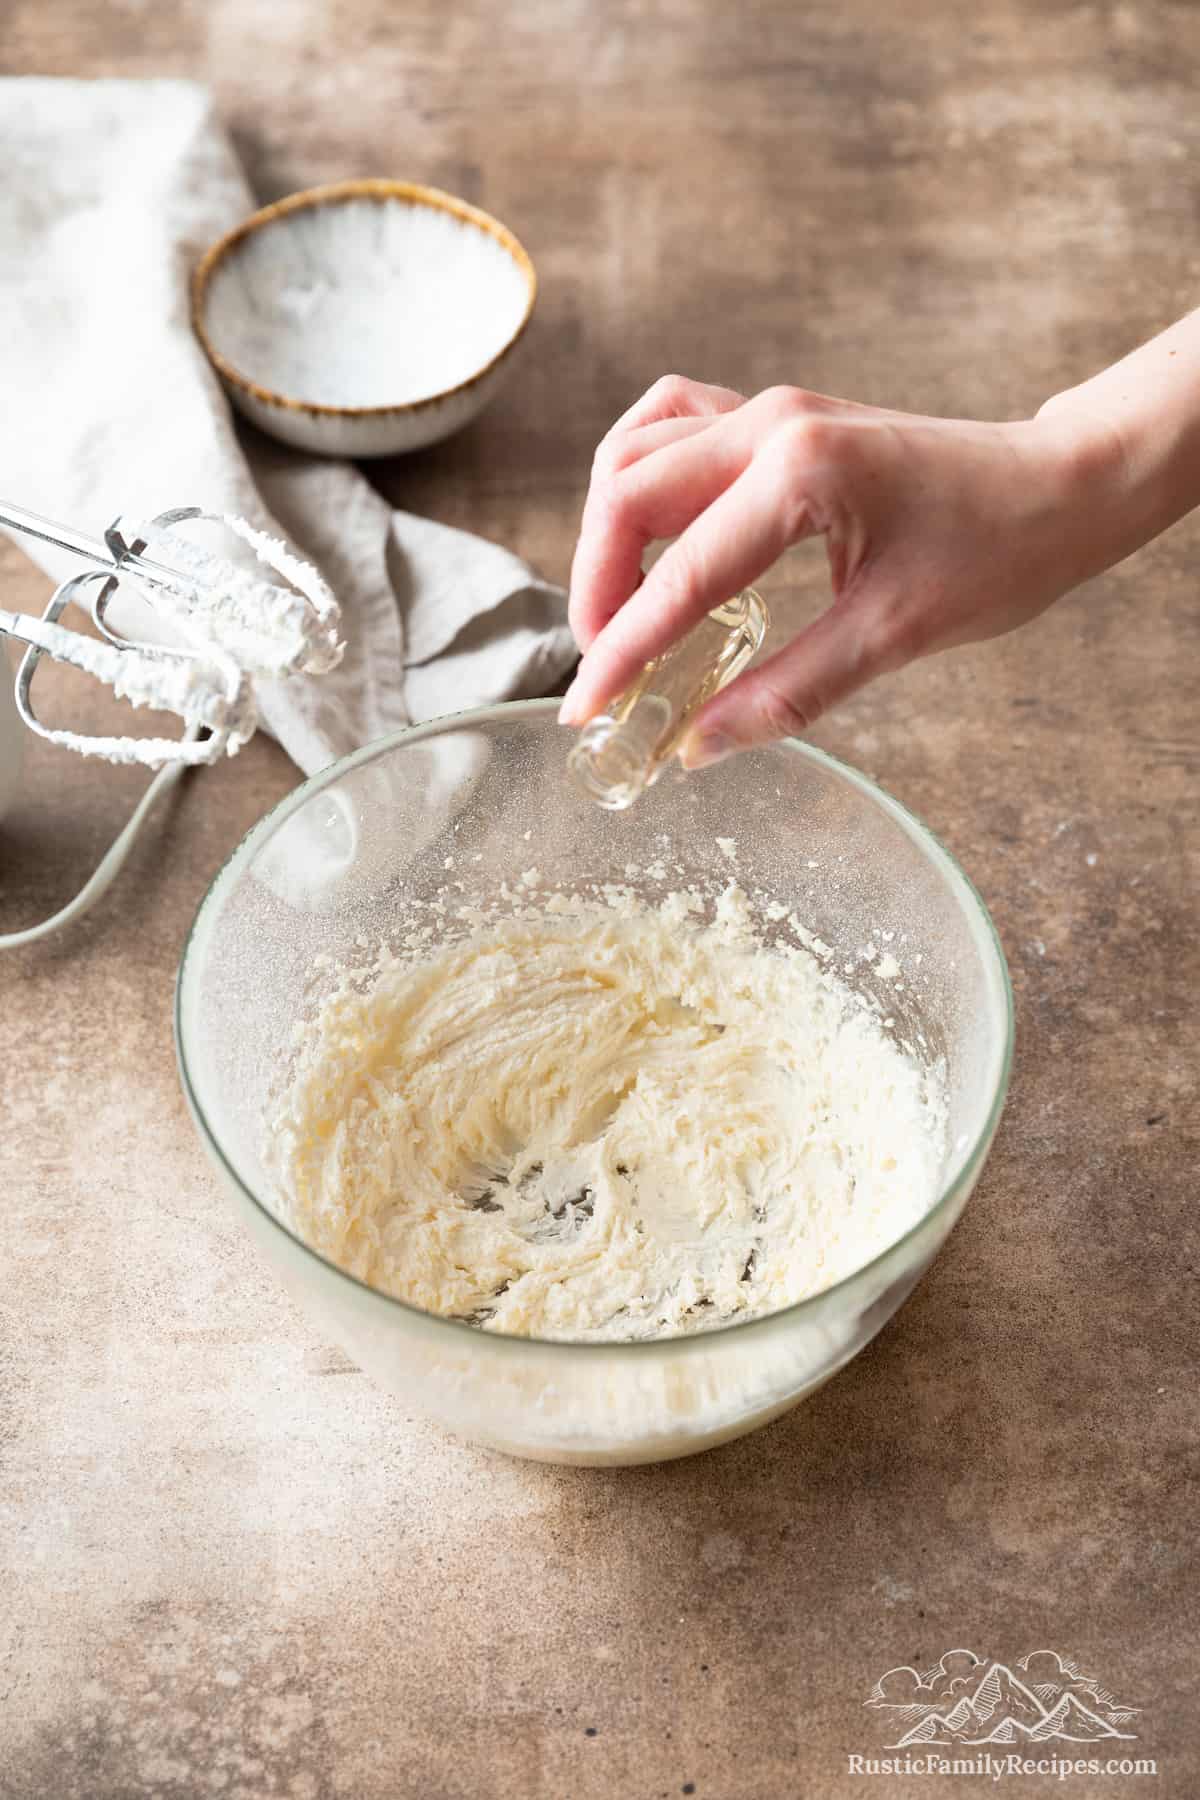 A hand pours vanilla extract from a small bottle into a bowl of powdered sugar creamed with butter, next to a hand mixer.